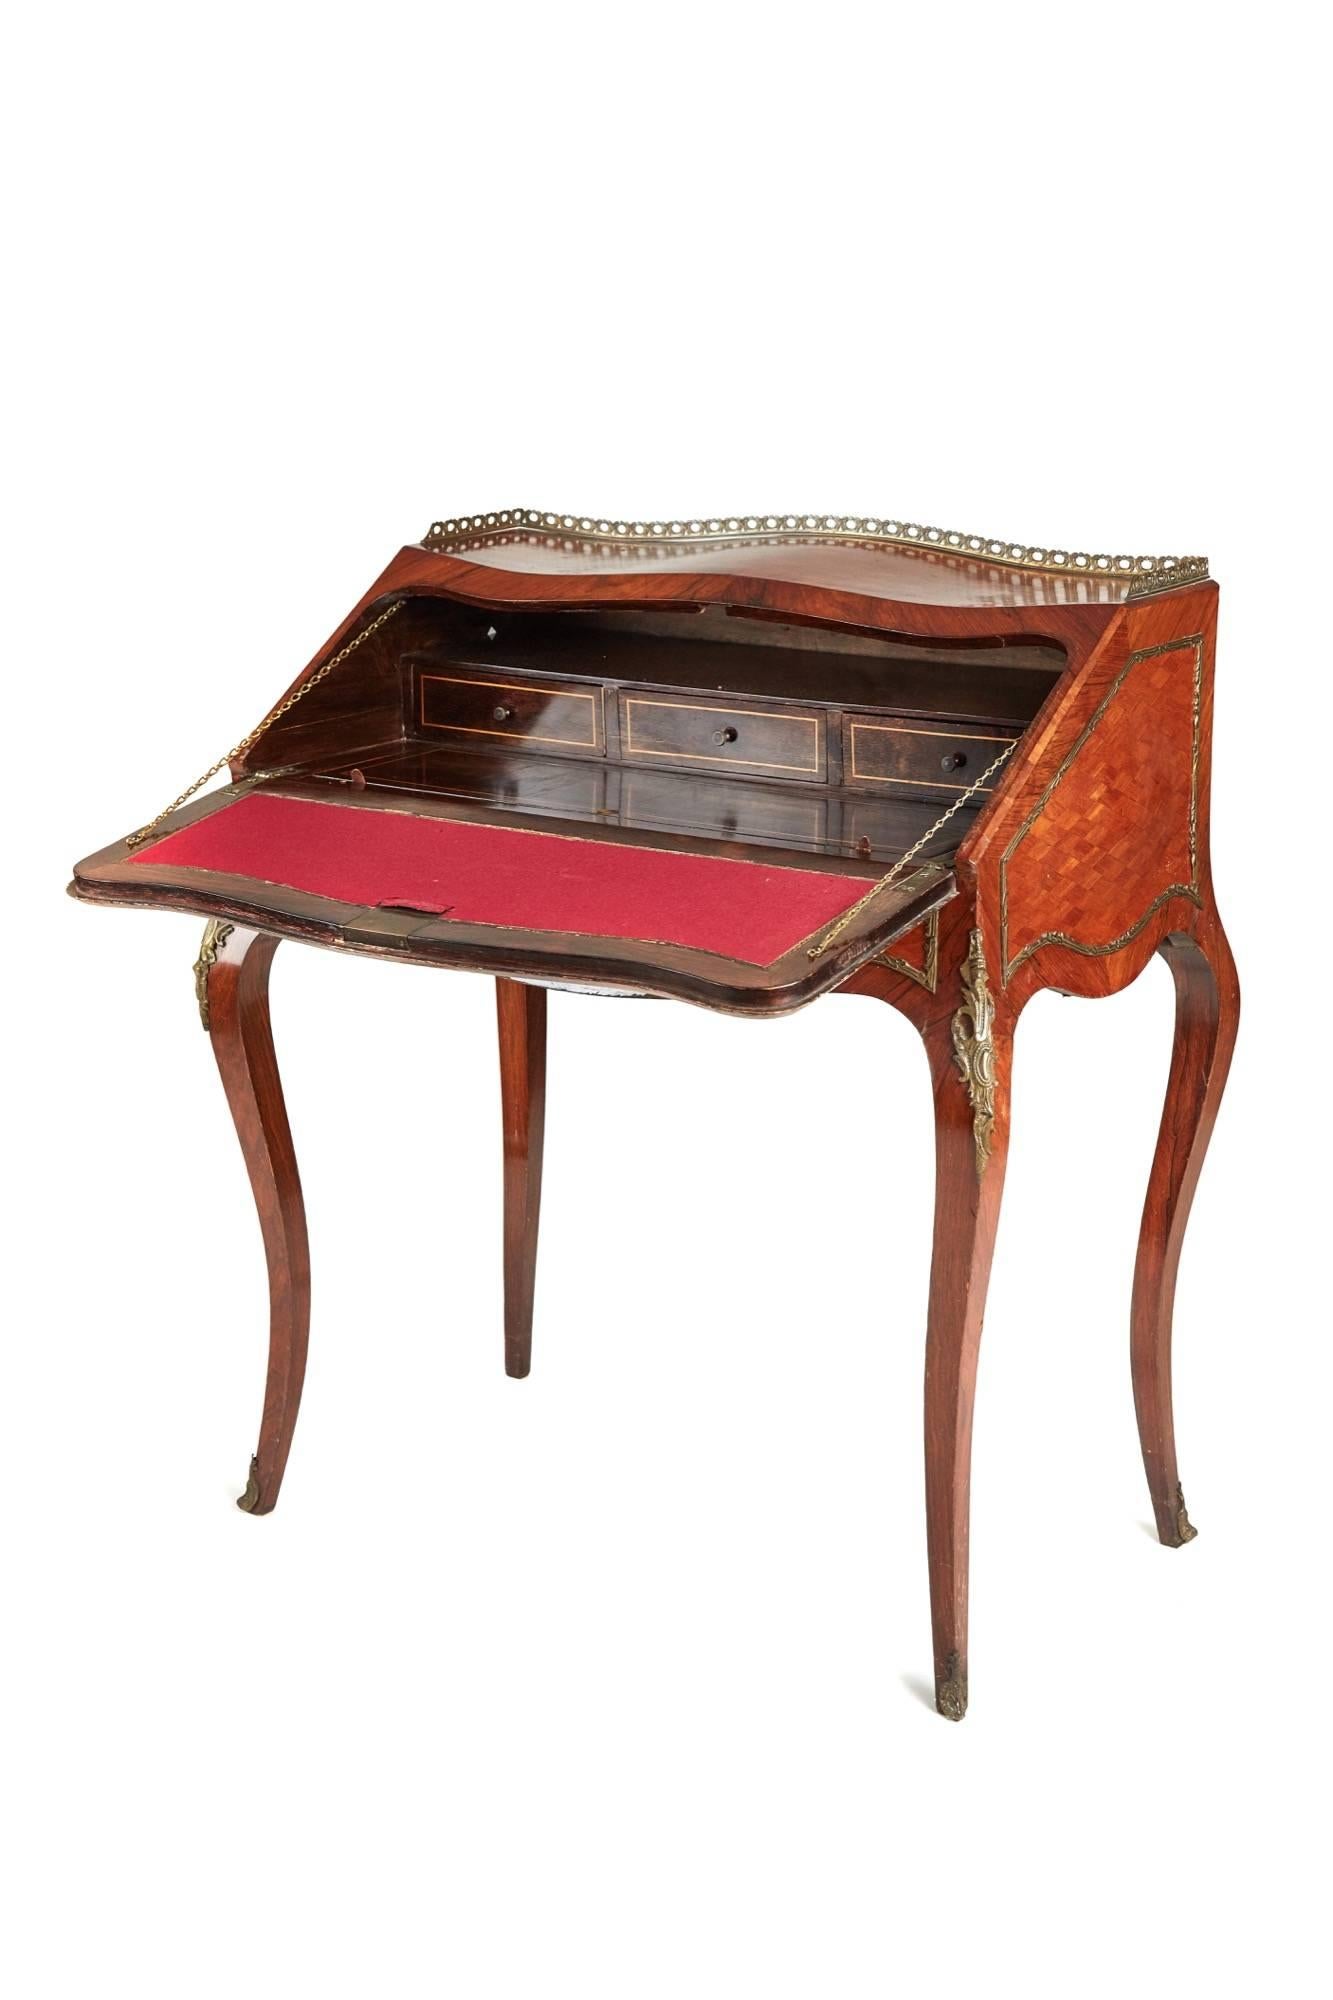 A French kingwood and parquetry bureau de dame with a shaped parquetry top original gilt metal gallery, shaped parquetry ends with gilt metal mounts, lovely shaped vernis martin painted fall crossbanded in kingwood, the inside has a writing surface